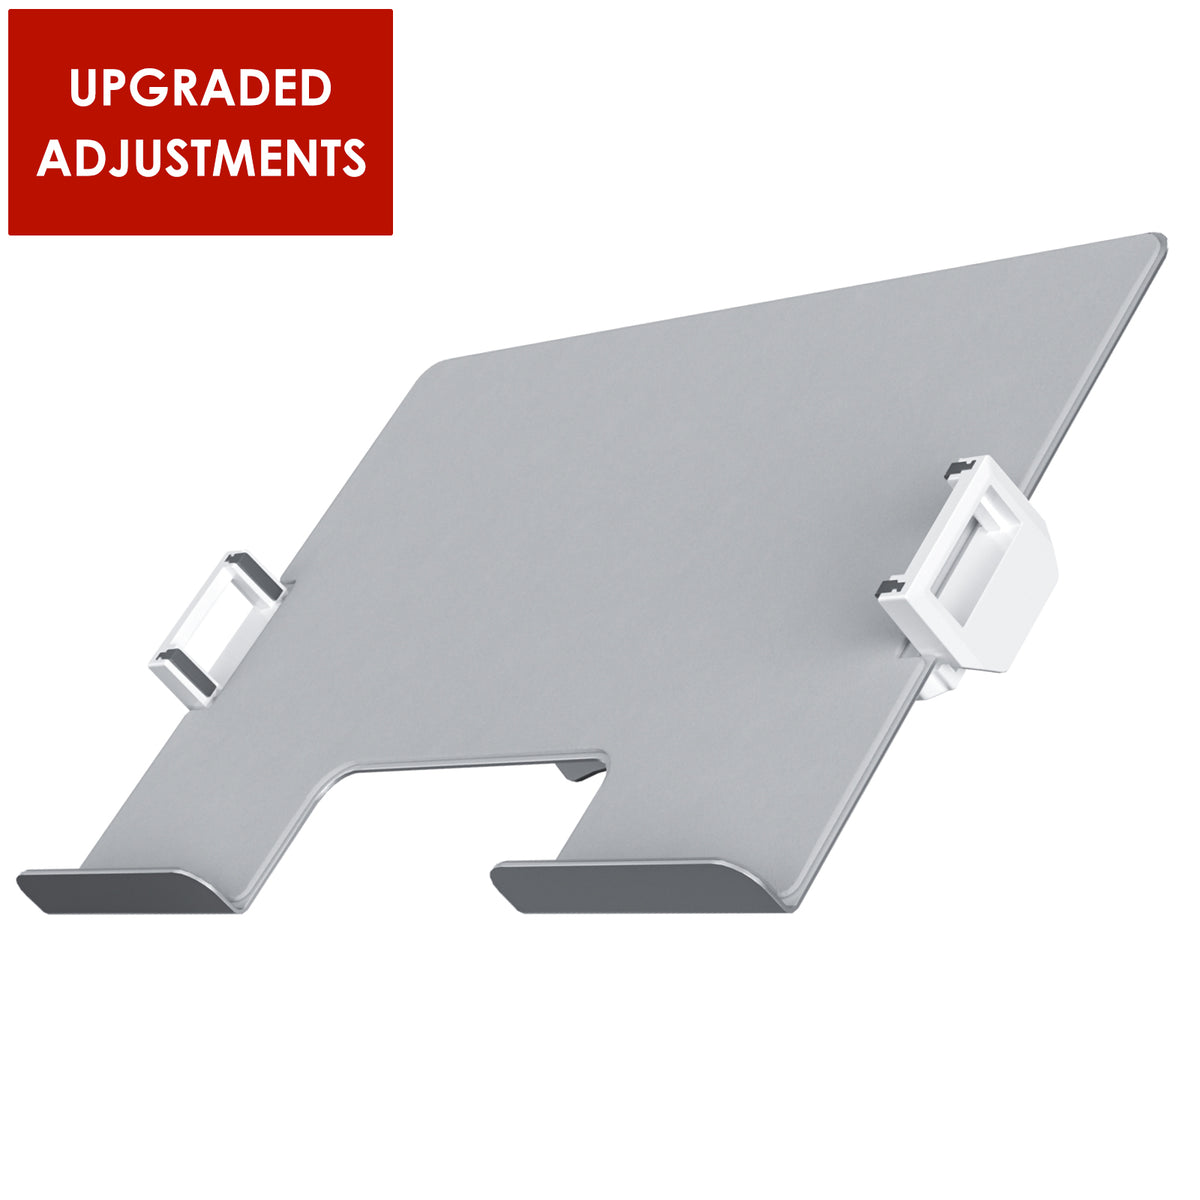 UPGRADED Laptop Tray (Fits 12-17&quot; Laptop/Notebook)